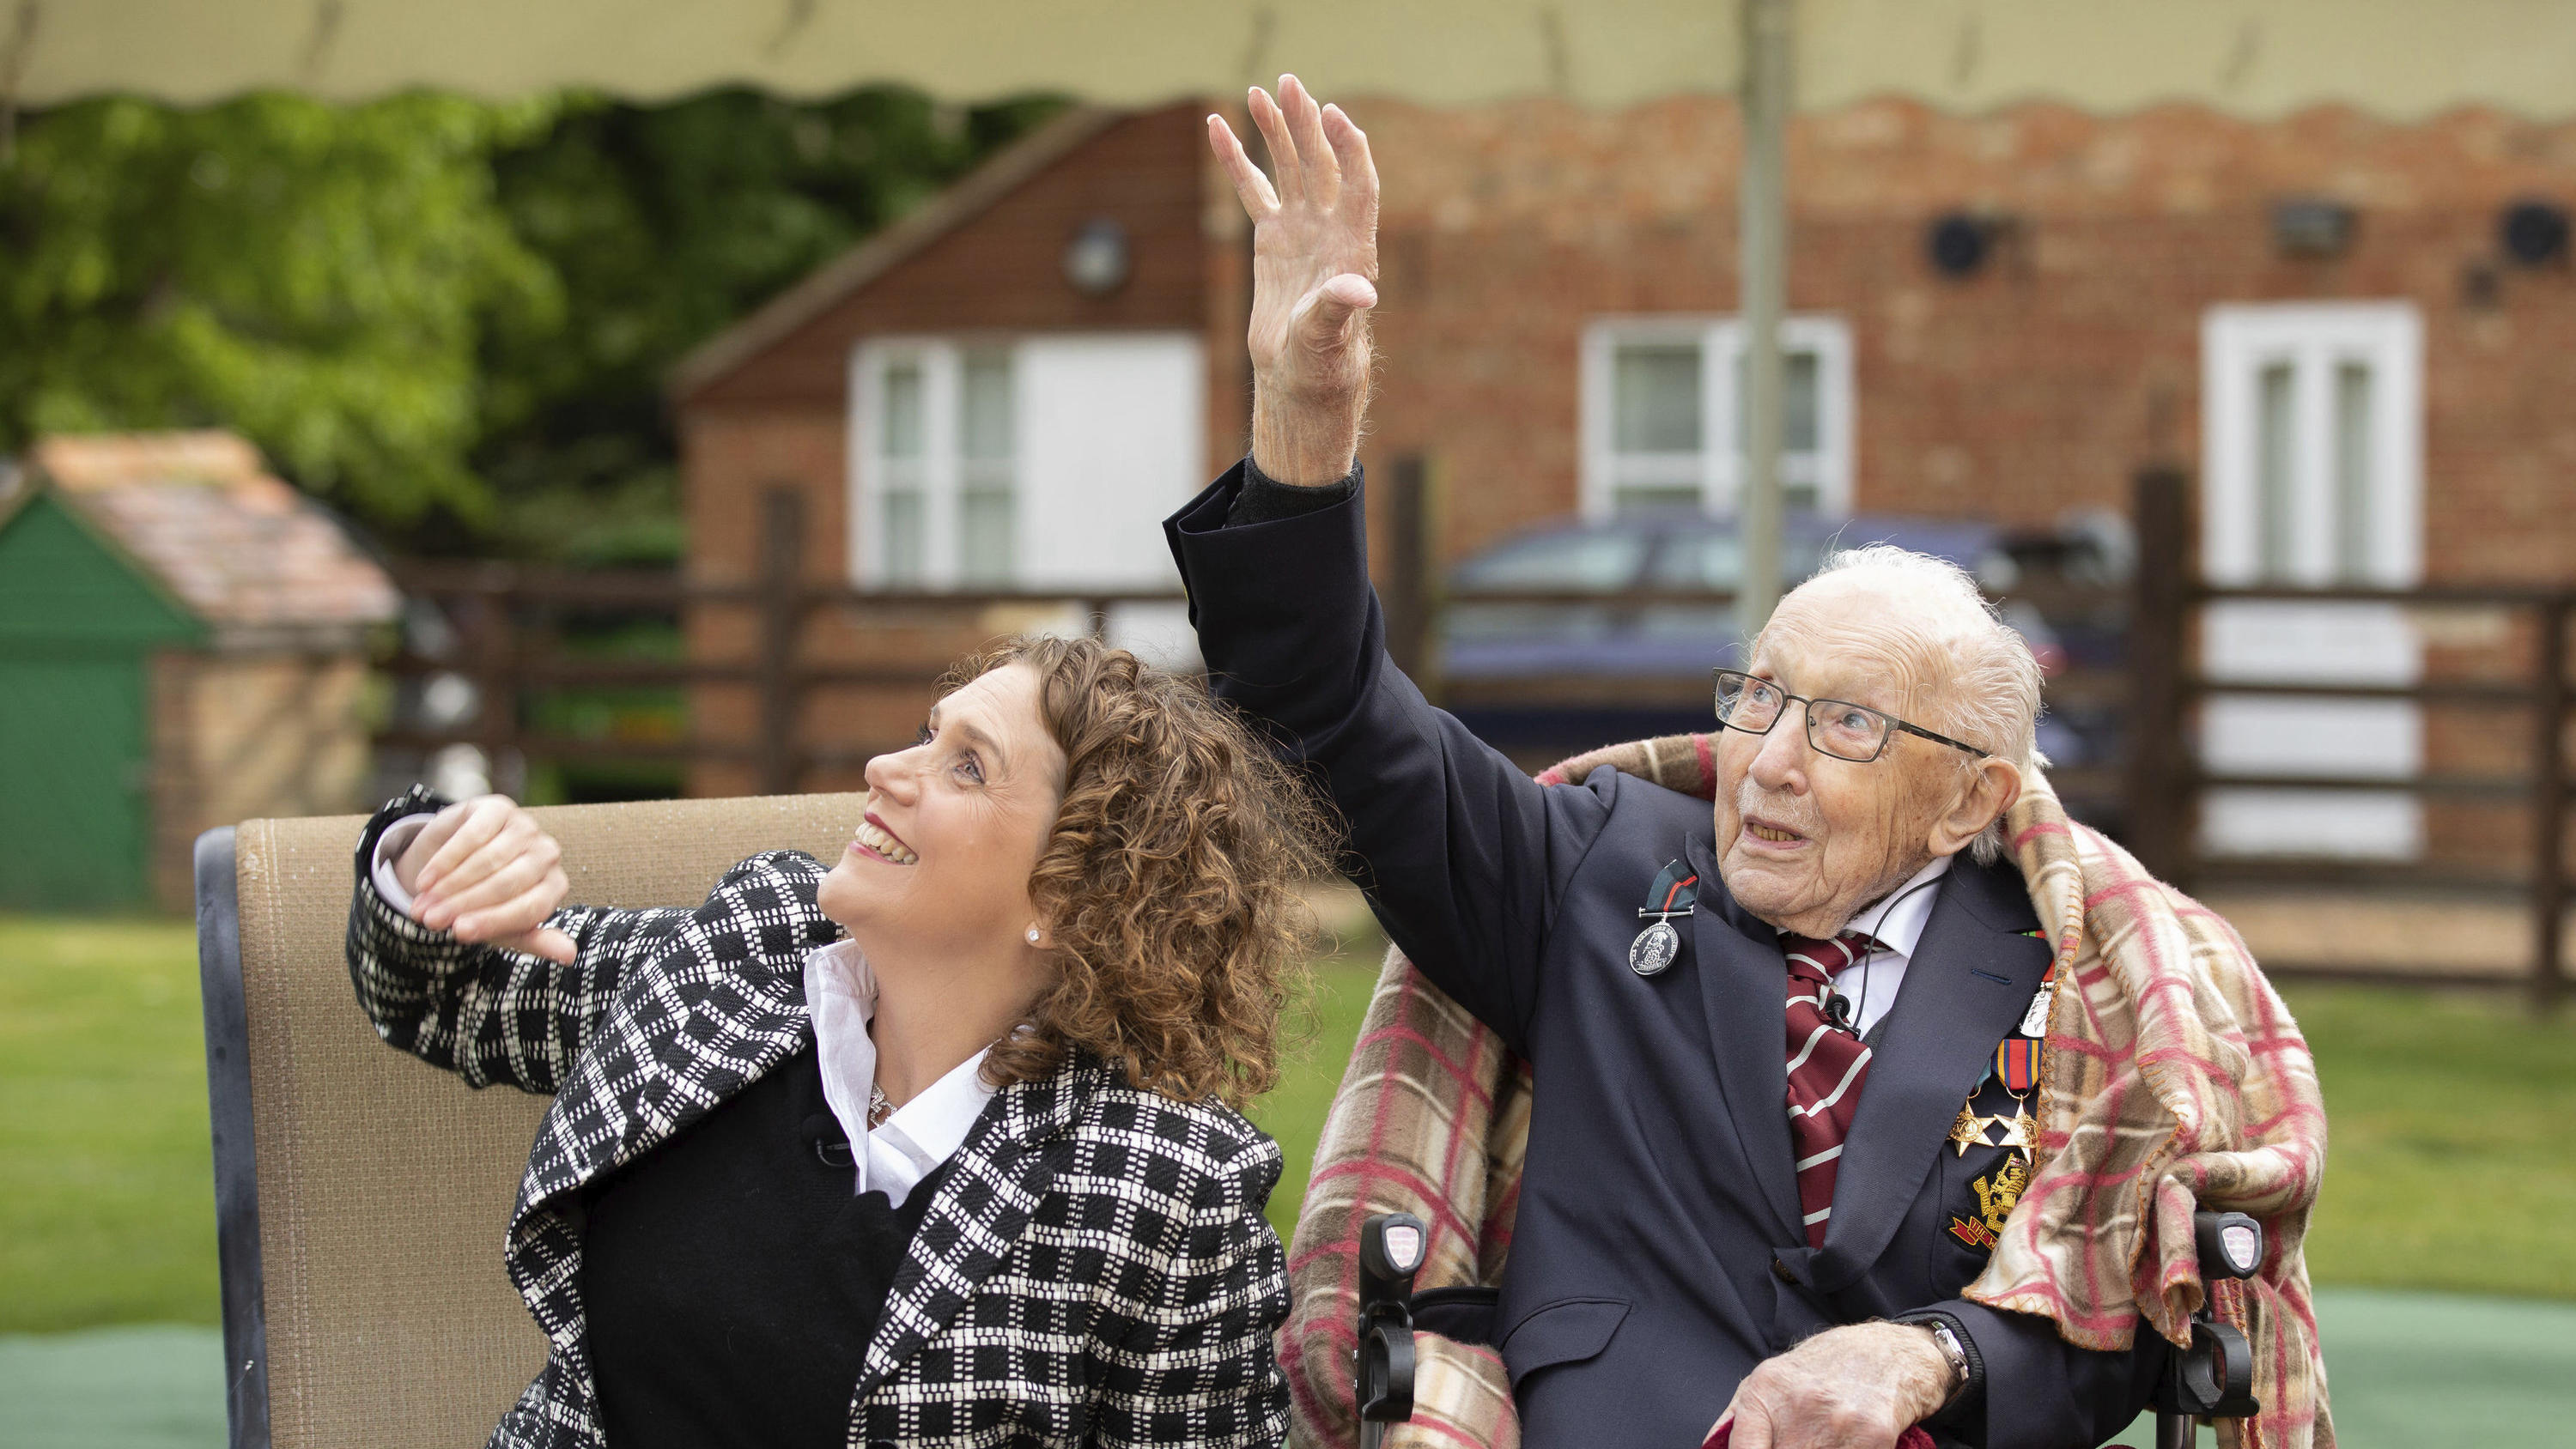 In this photo issued by Capture the Light Photography, showing Second World War veteran Captain Tom Moore with his daughter Hannah, as they react to Battle of Britain Memorial Flight flypast of a Spitfire and a Hurricane passing over his home as he c